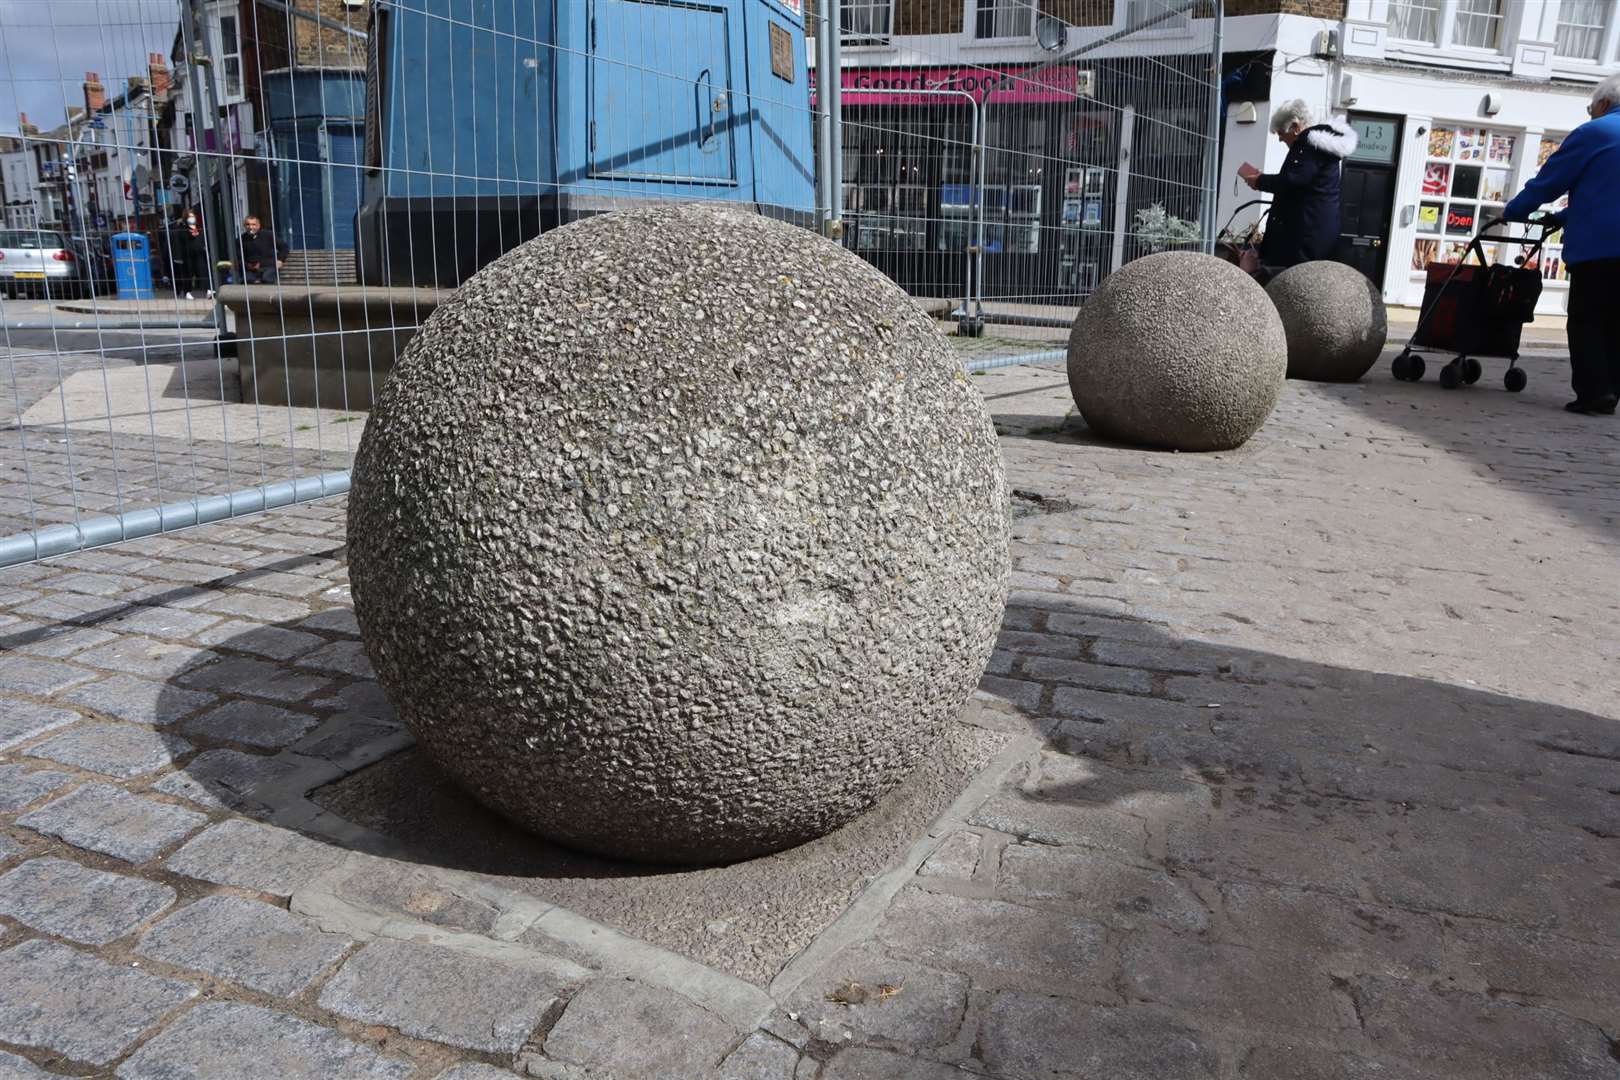 The concrete 'Worrall Balls' named after former Cllr Steve Worrall which surround Sheerness clock tower